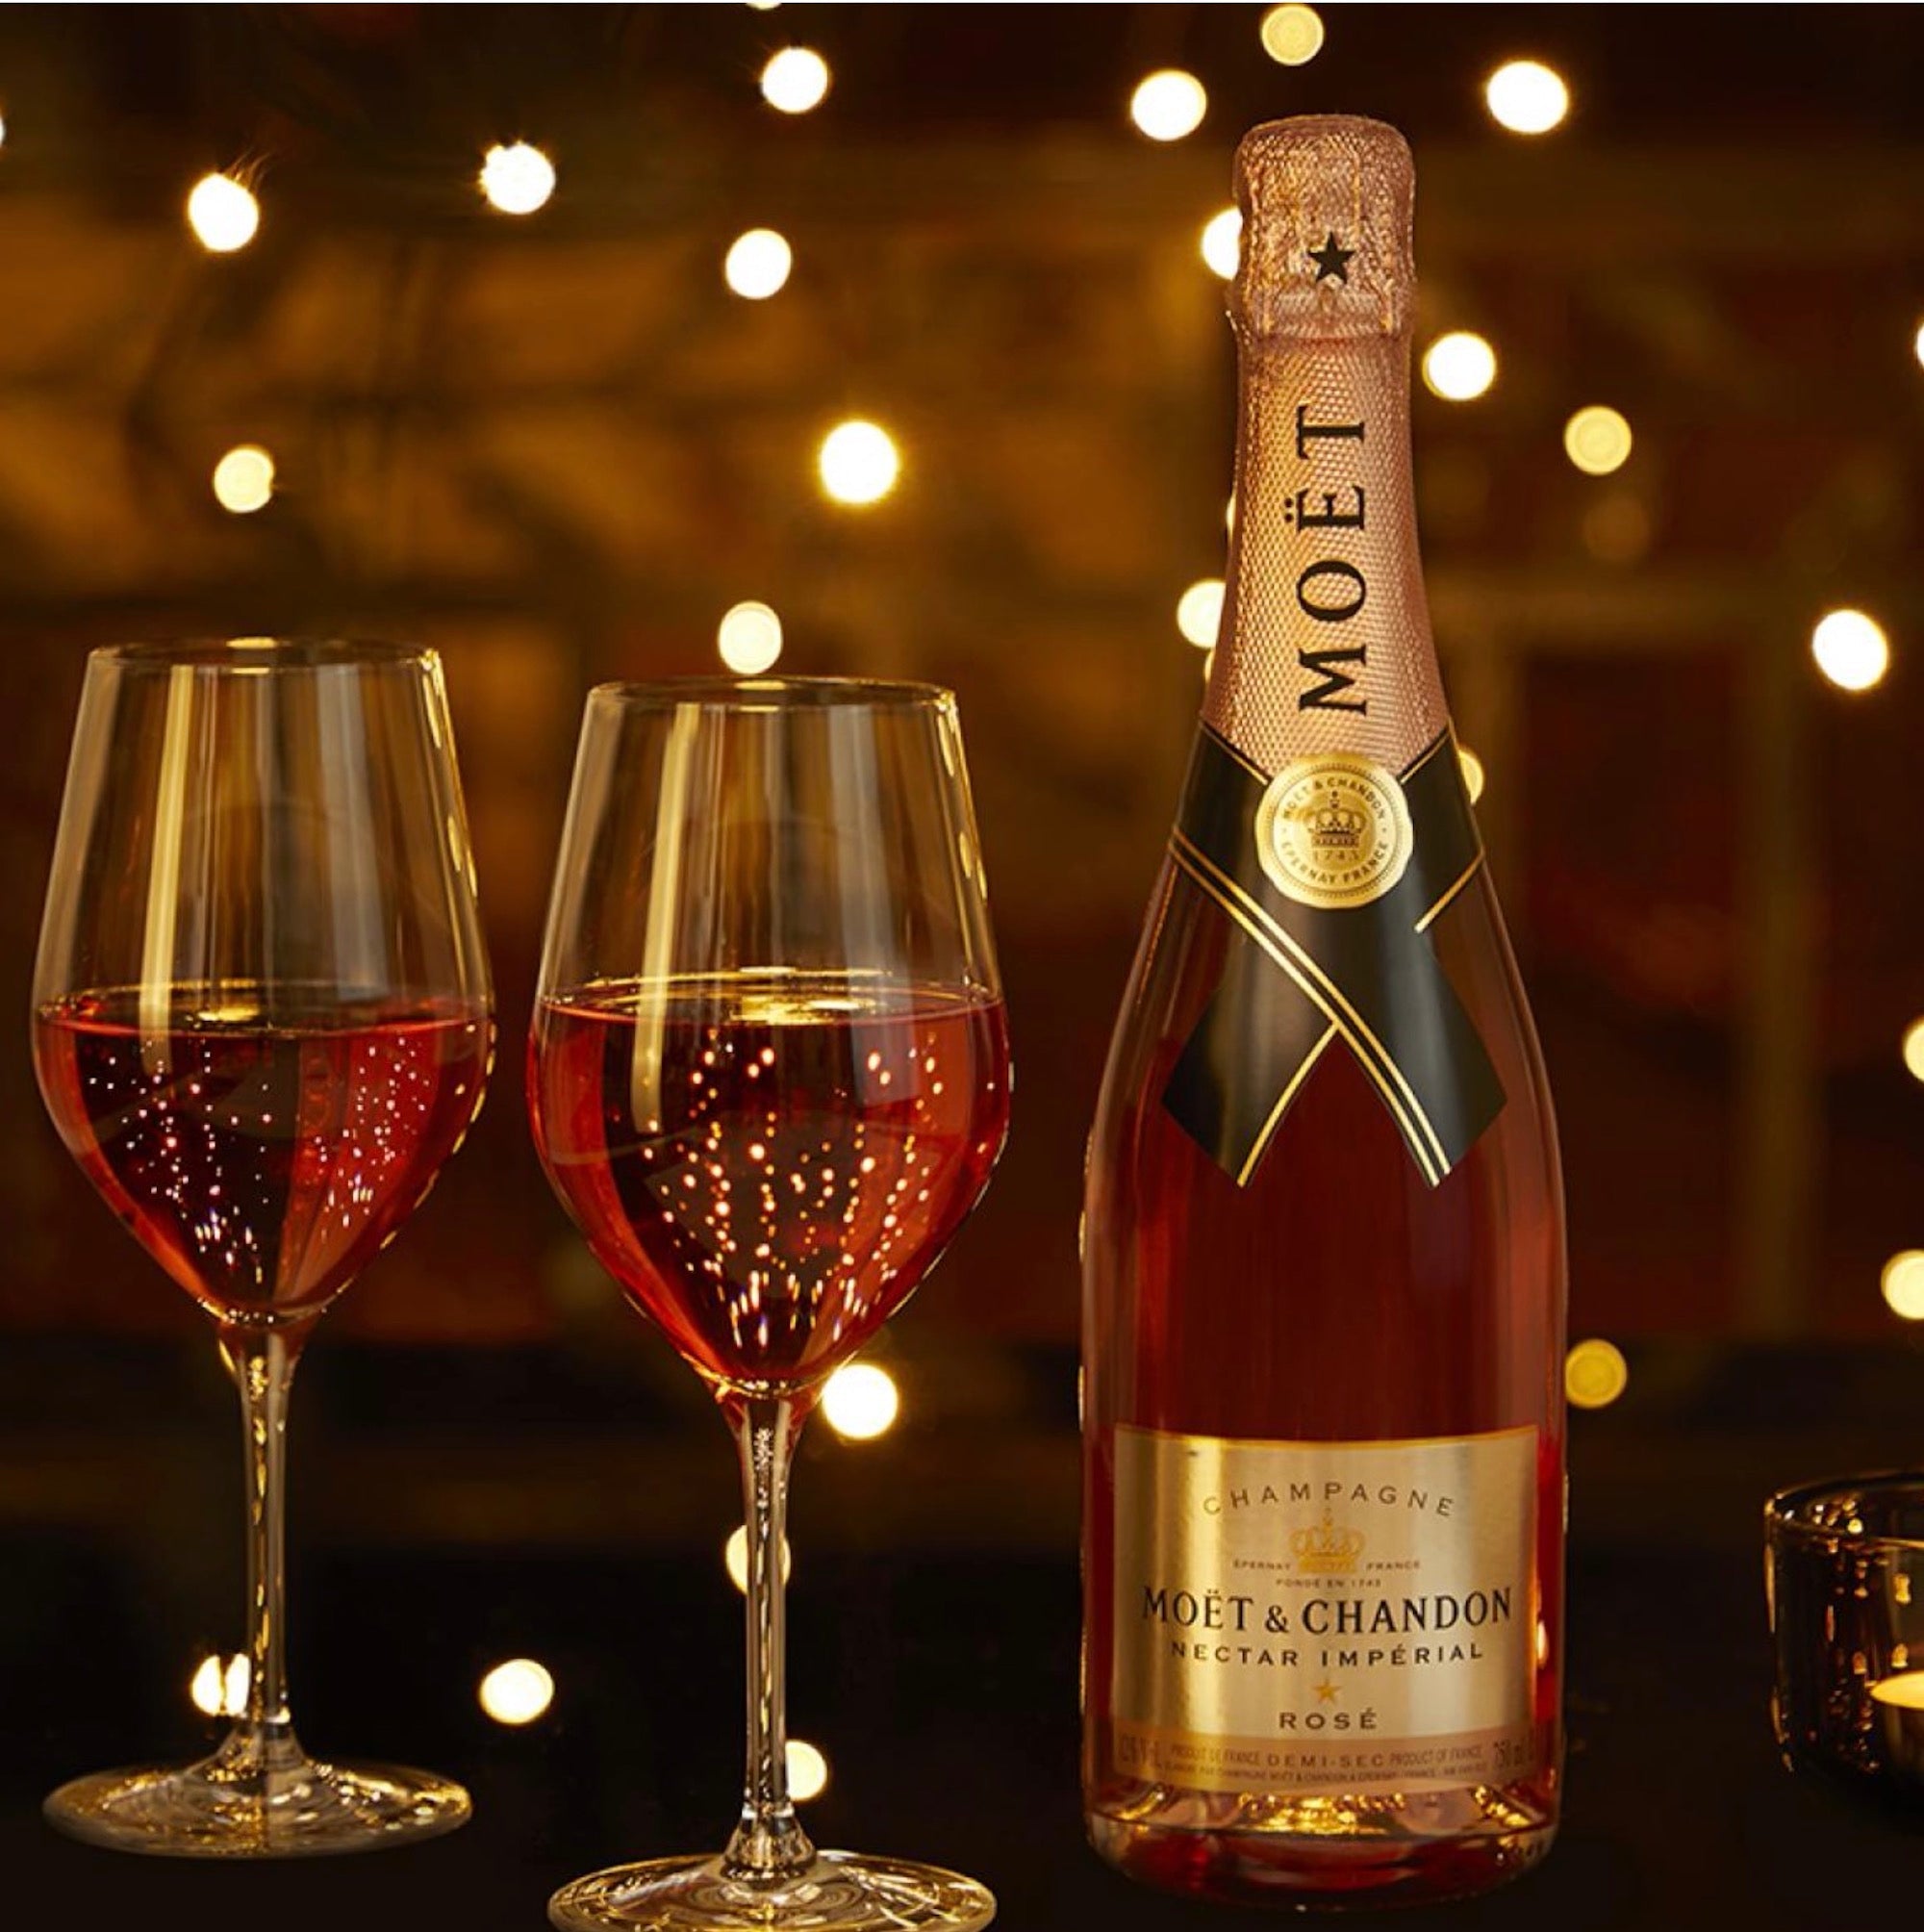 Moet Nectar Imperial Rose Light Up Limited Edition - Gold Eagle